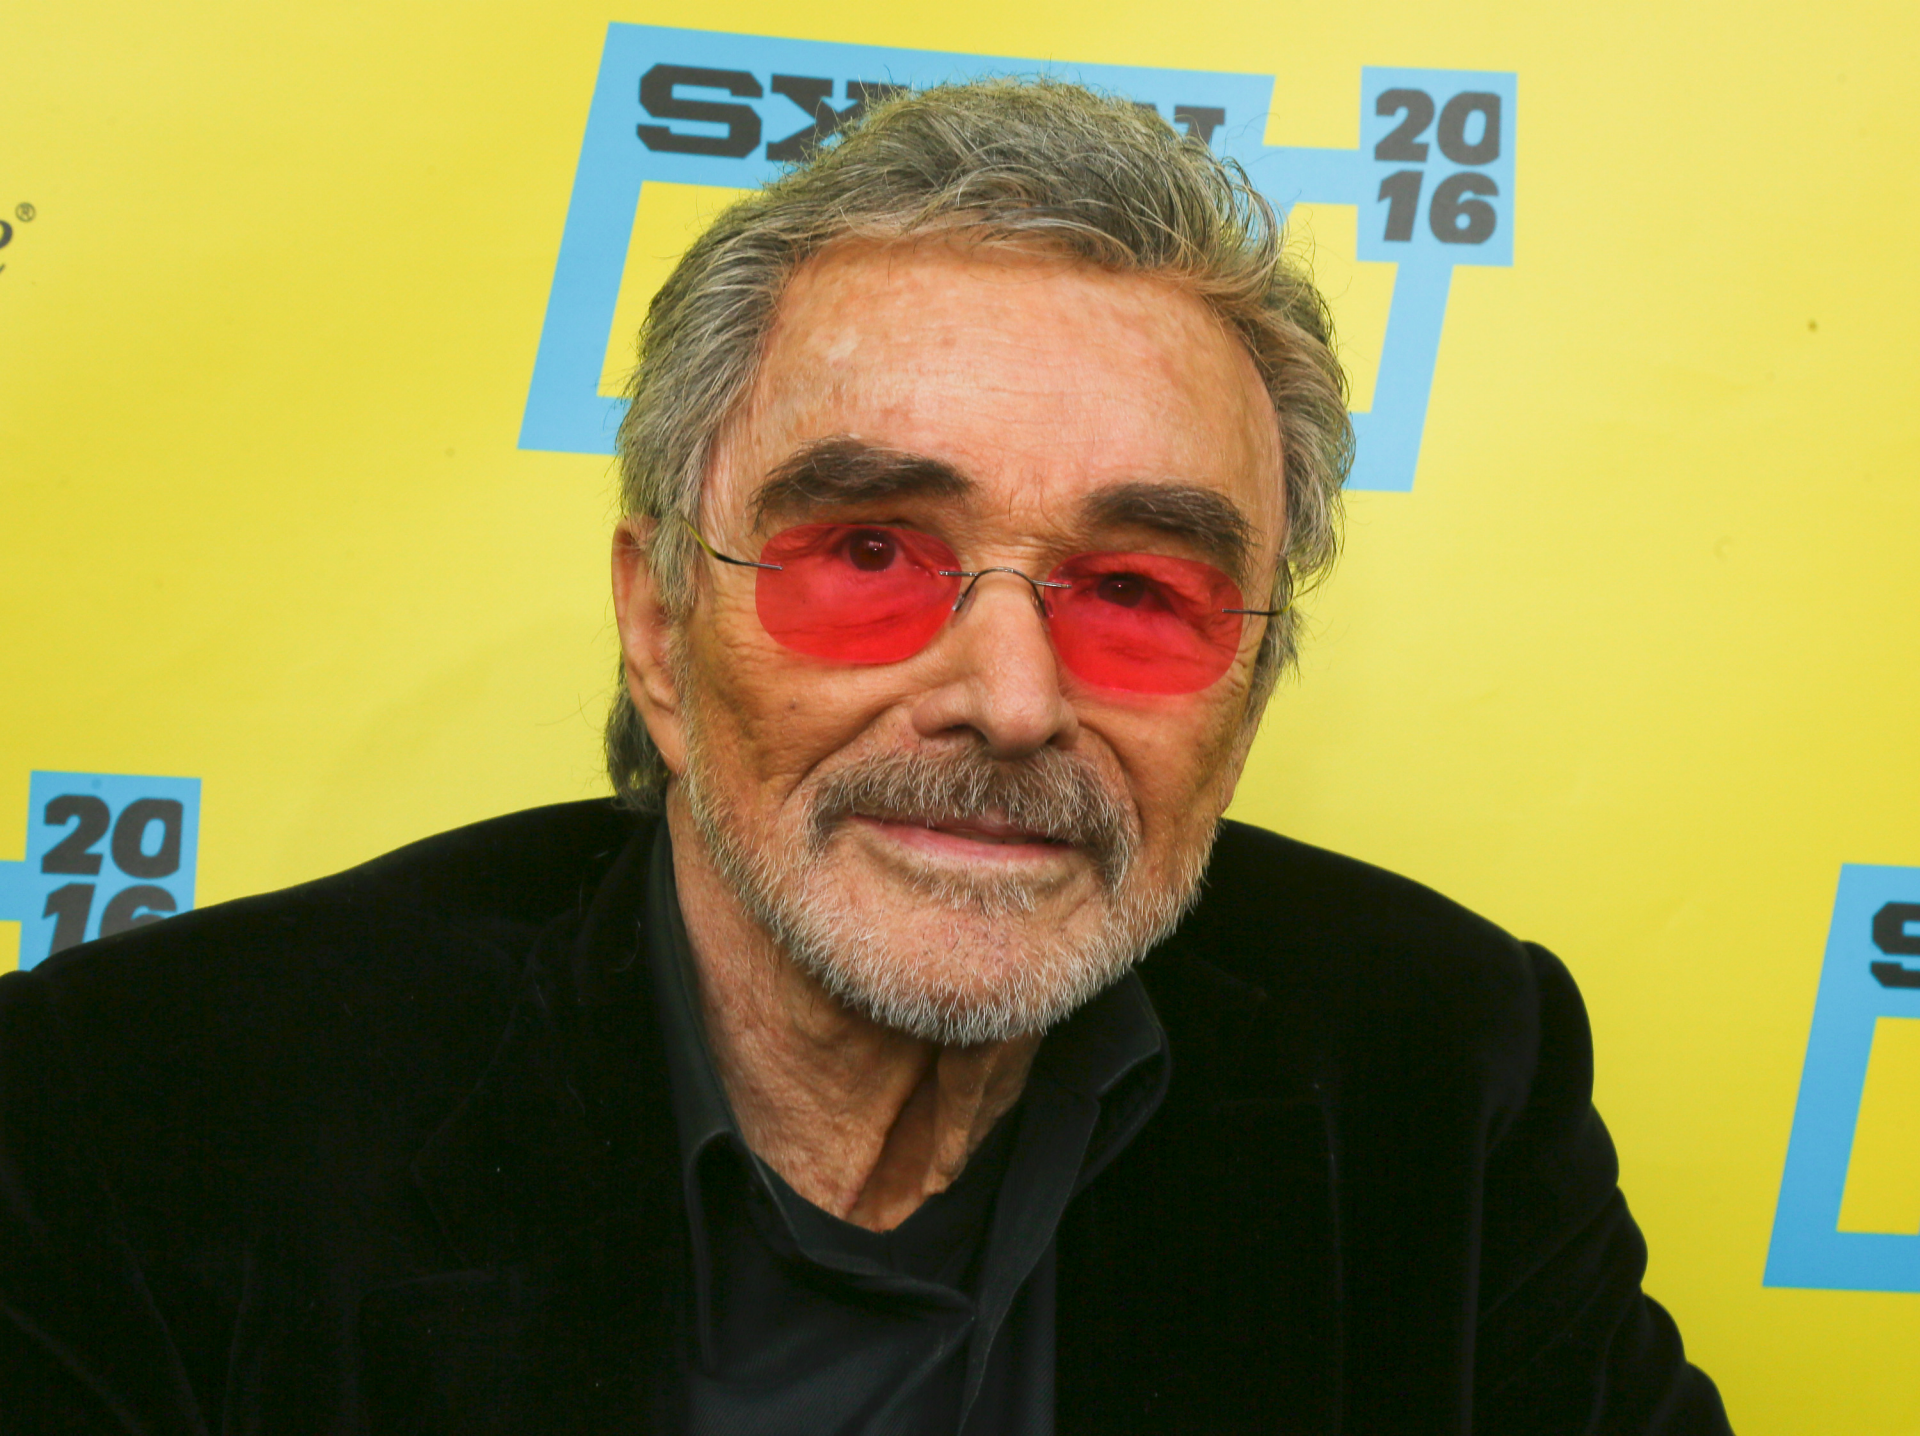 Burt Reynolds' remains find home at Hollywood cemetery -- more than 2 years after star's death